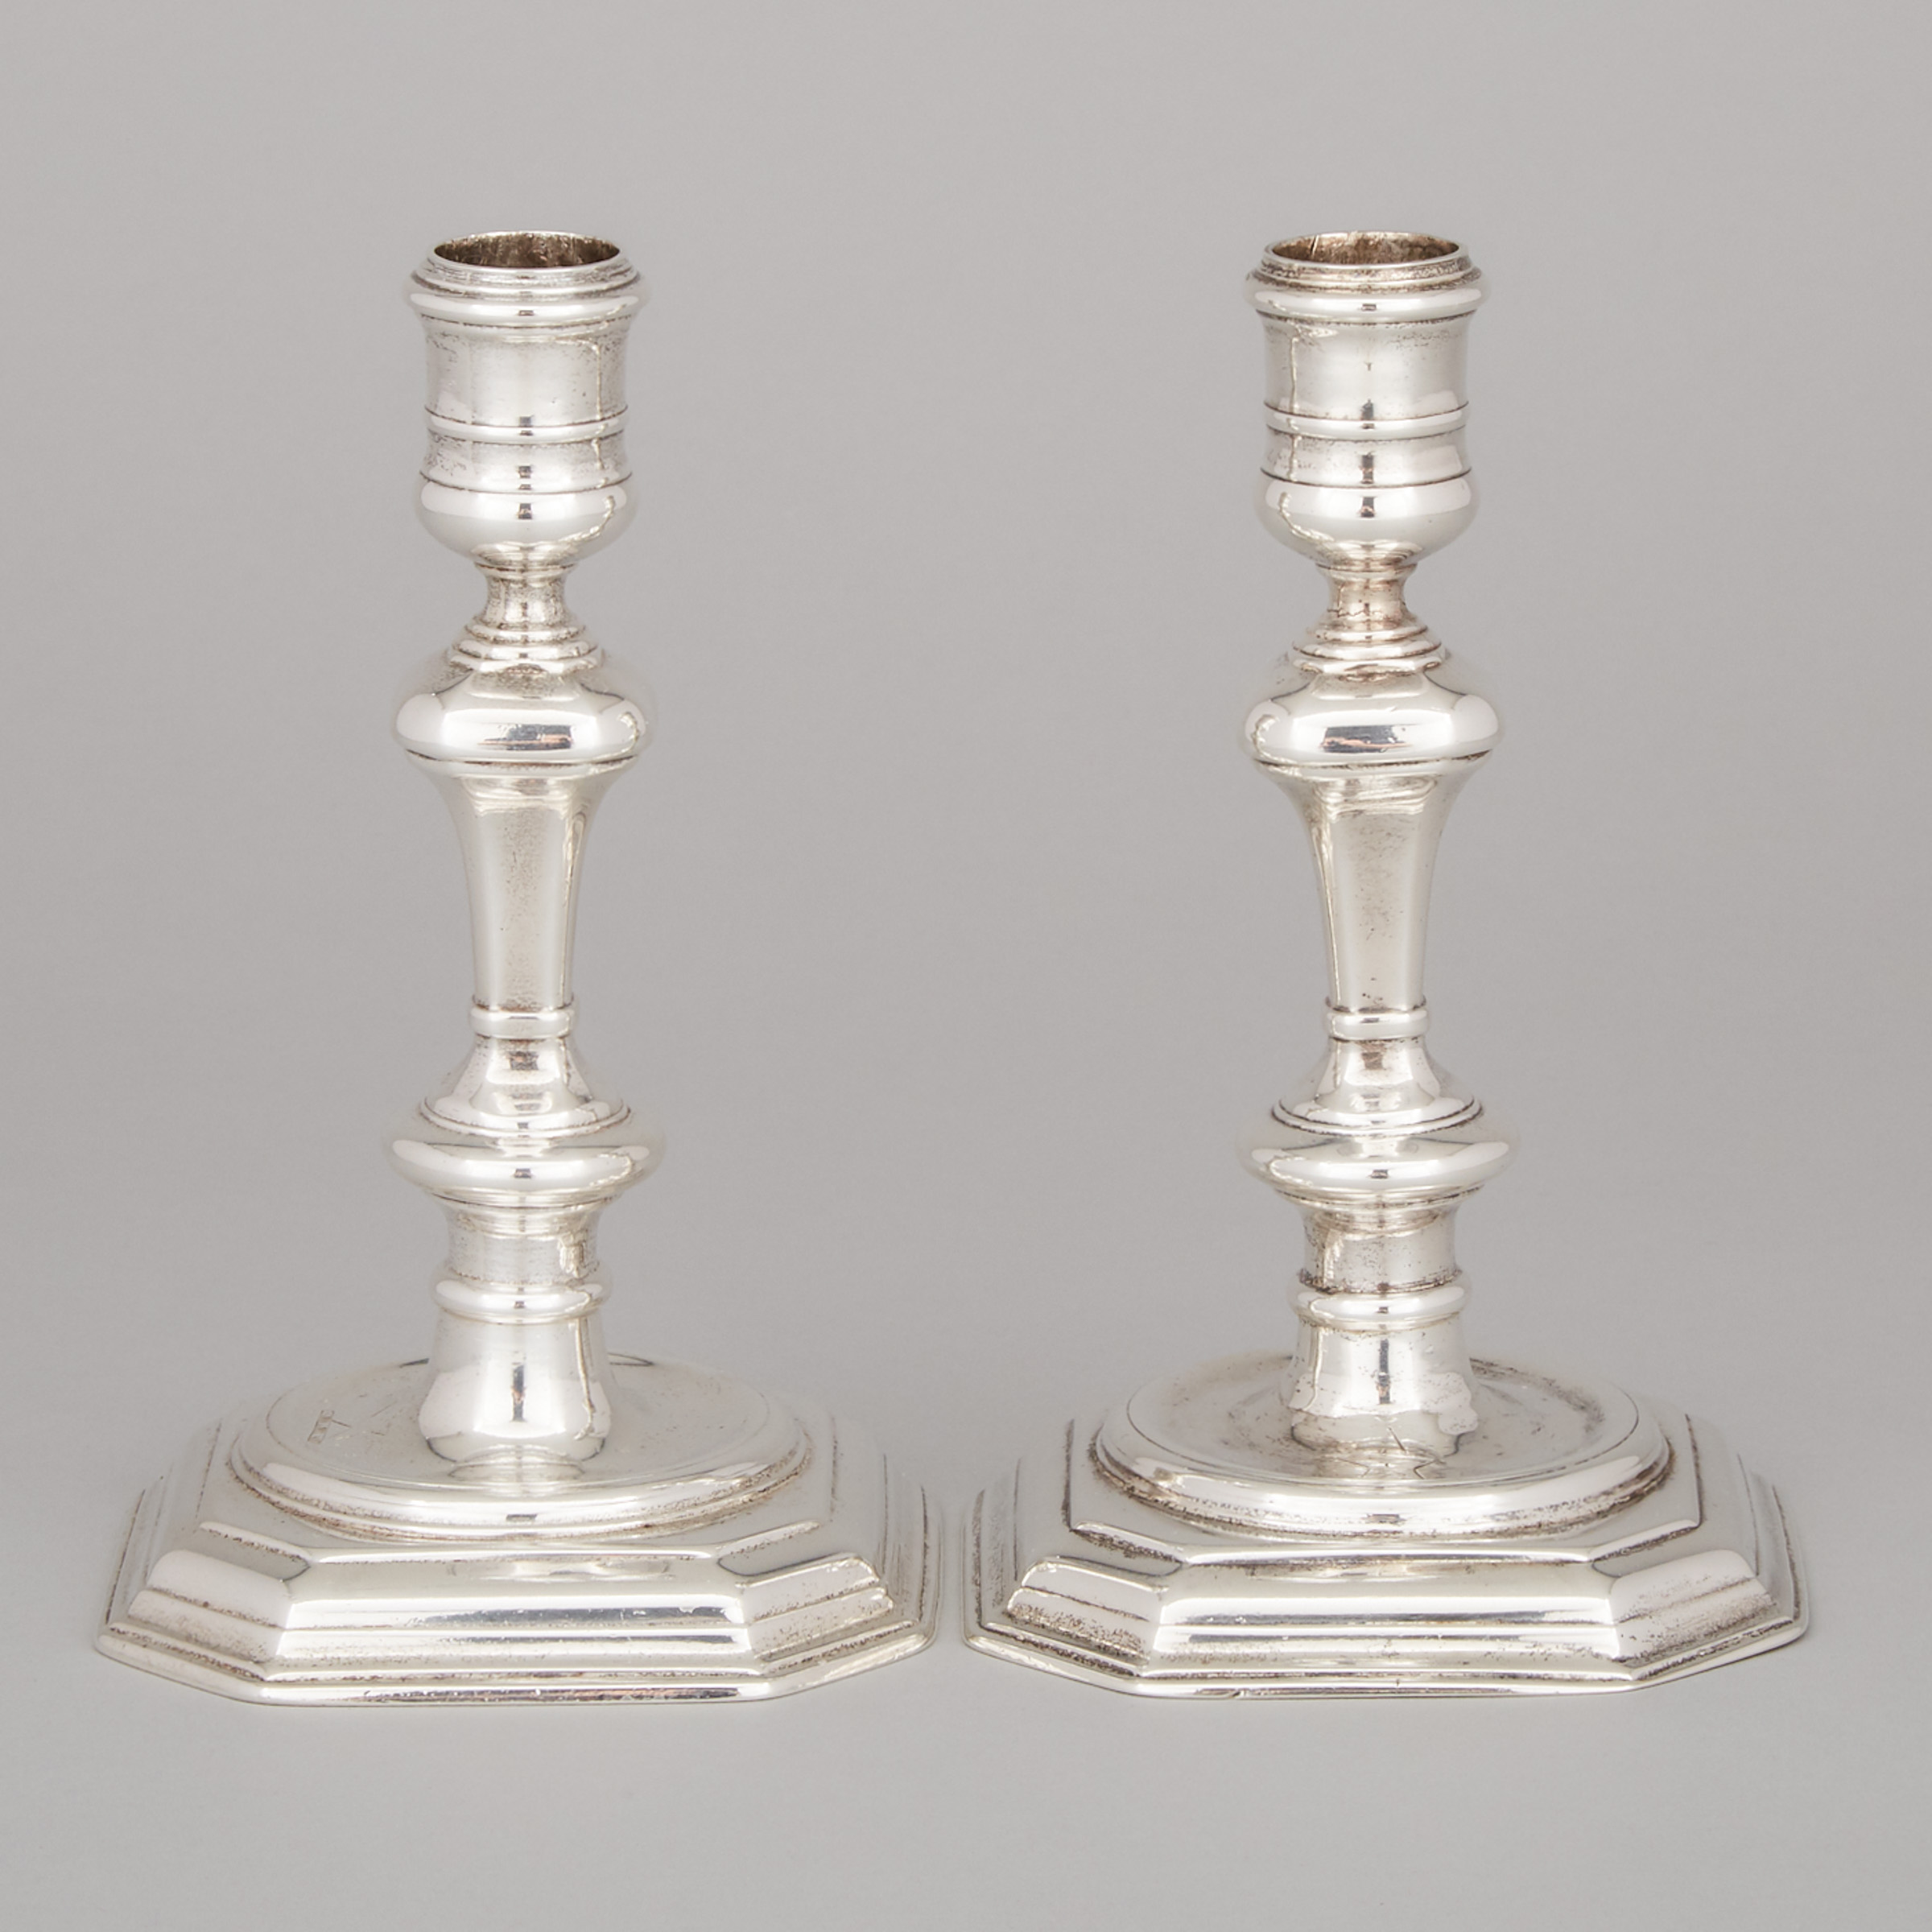 Pair of George I Silver Candlesticks, Samuel Margas, London, 1724